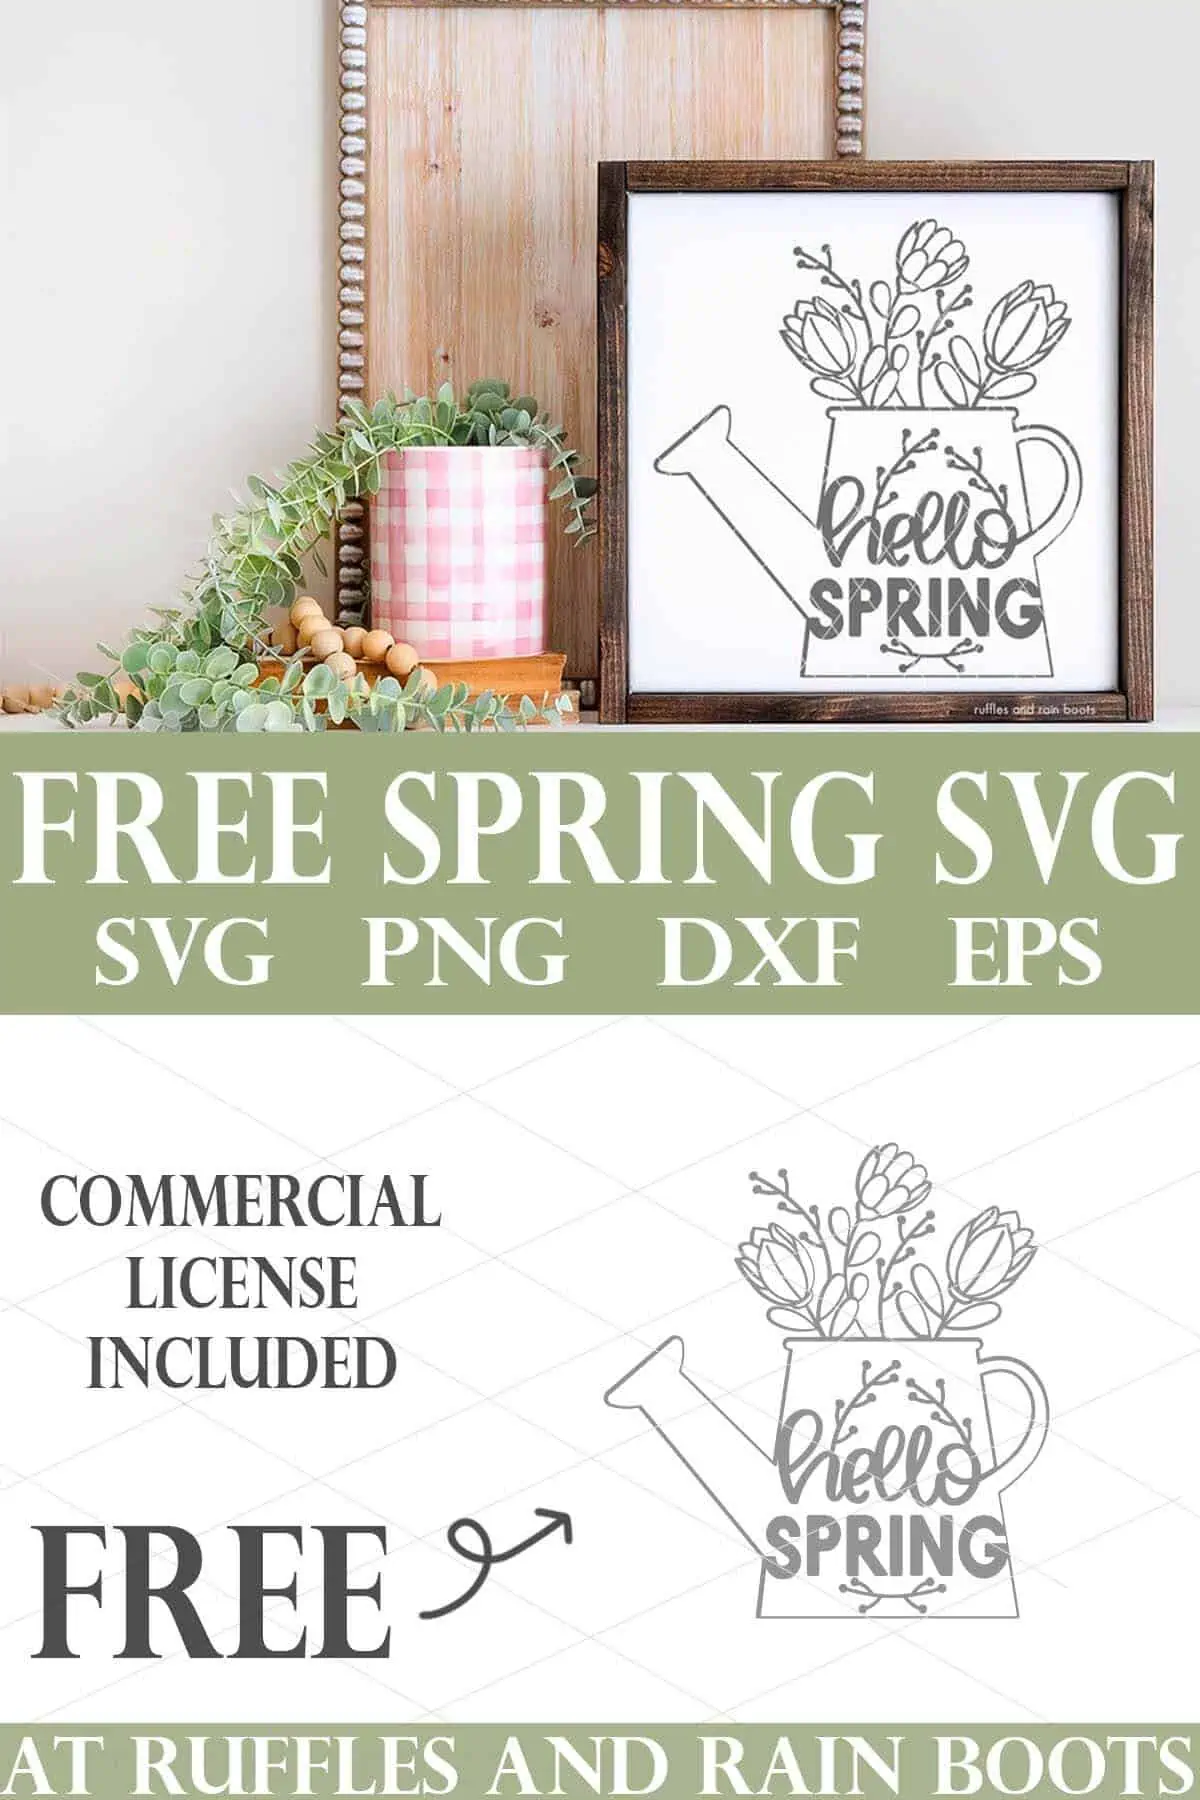 Vertical stacked image of free spring svg with watering can and flowers in front of a farmhouse shelf styled with beads and planter.